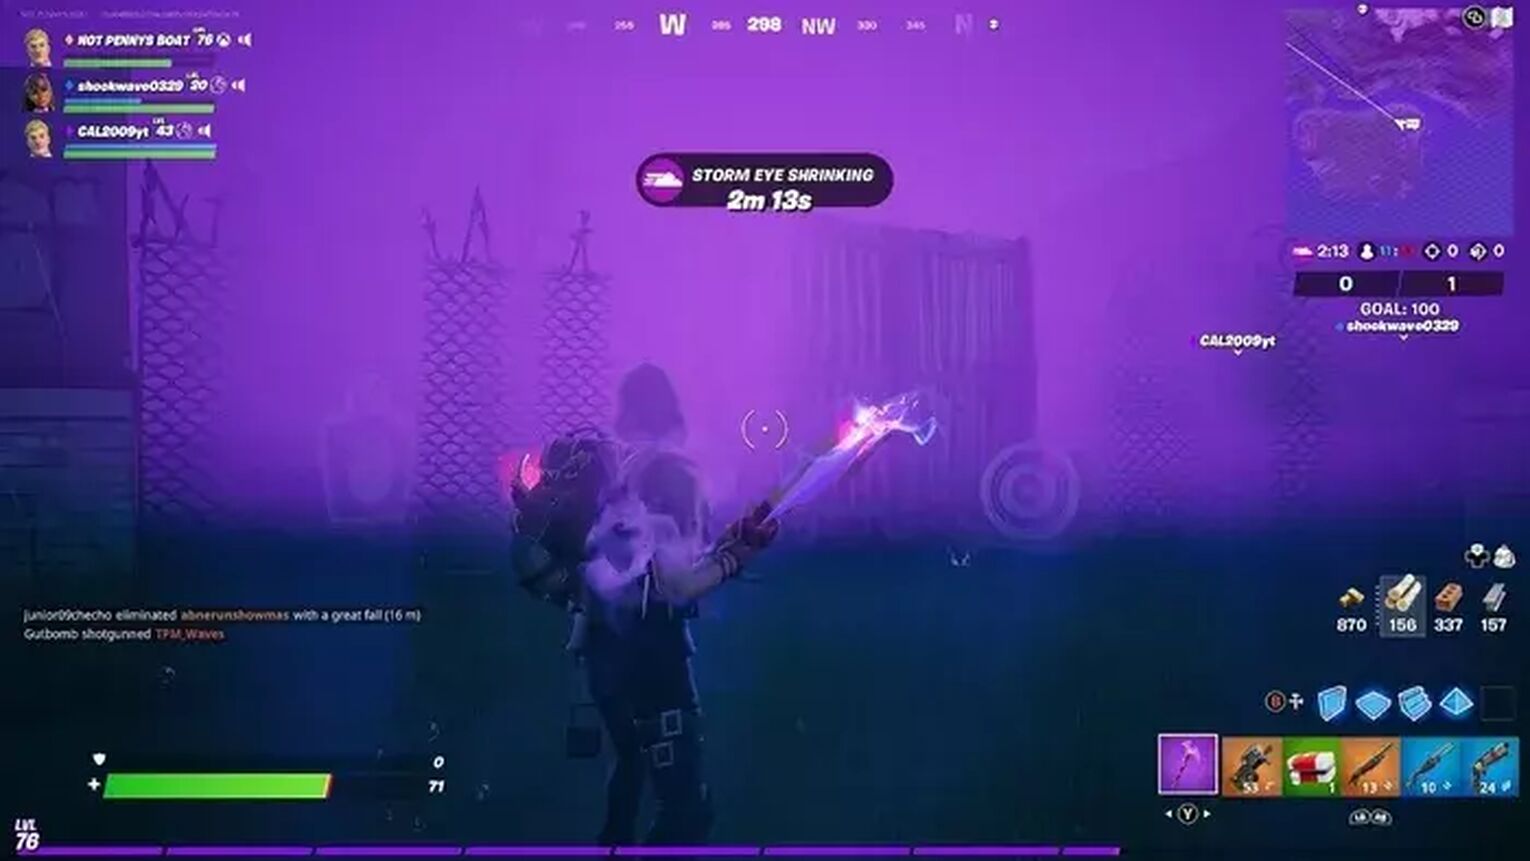 Follow The Purple Line to Stay Alive in Fortnite storm